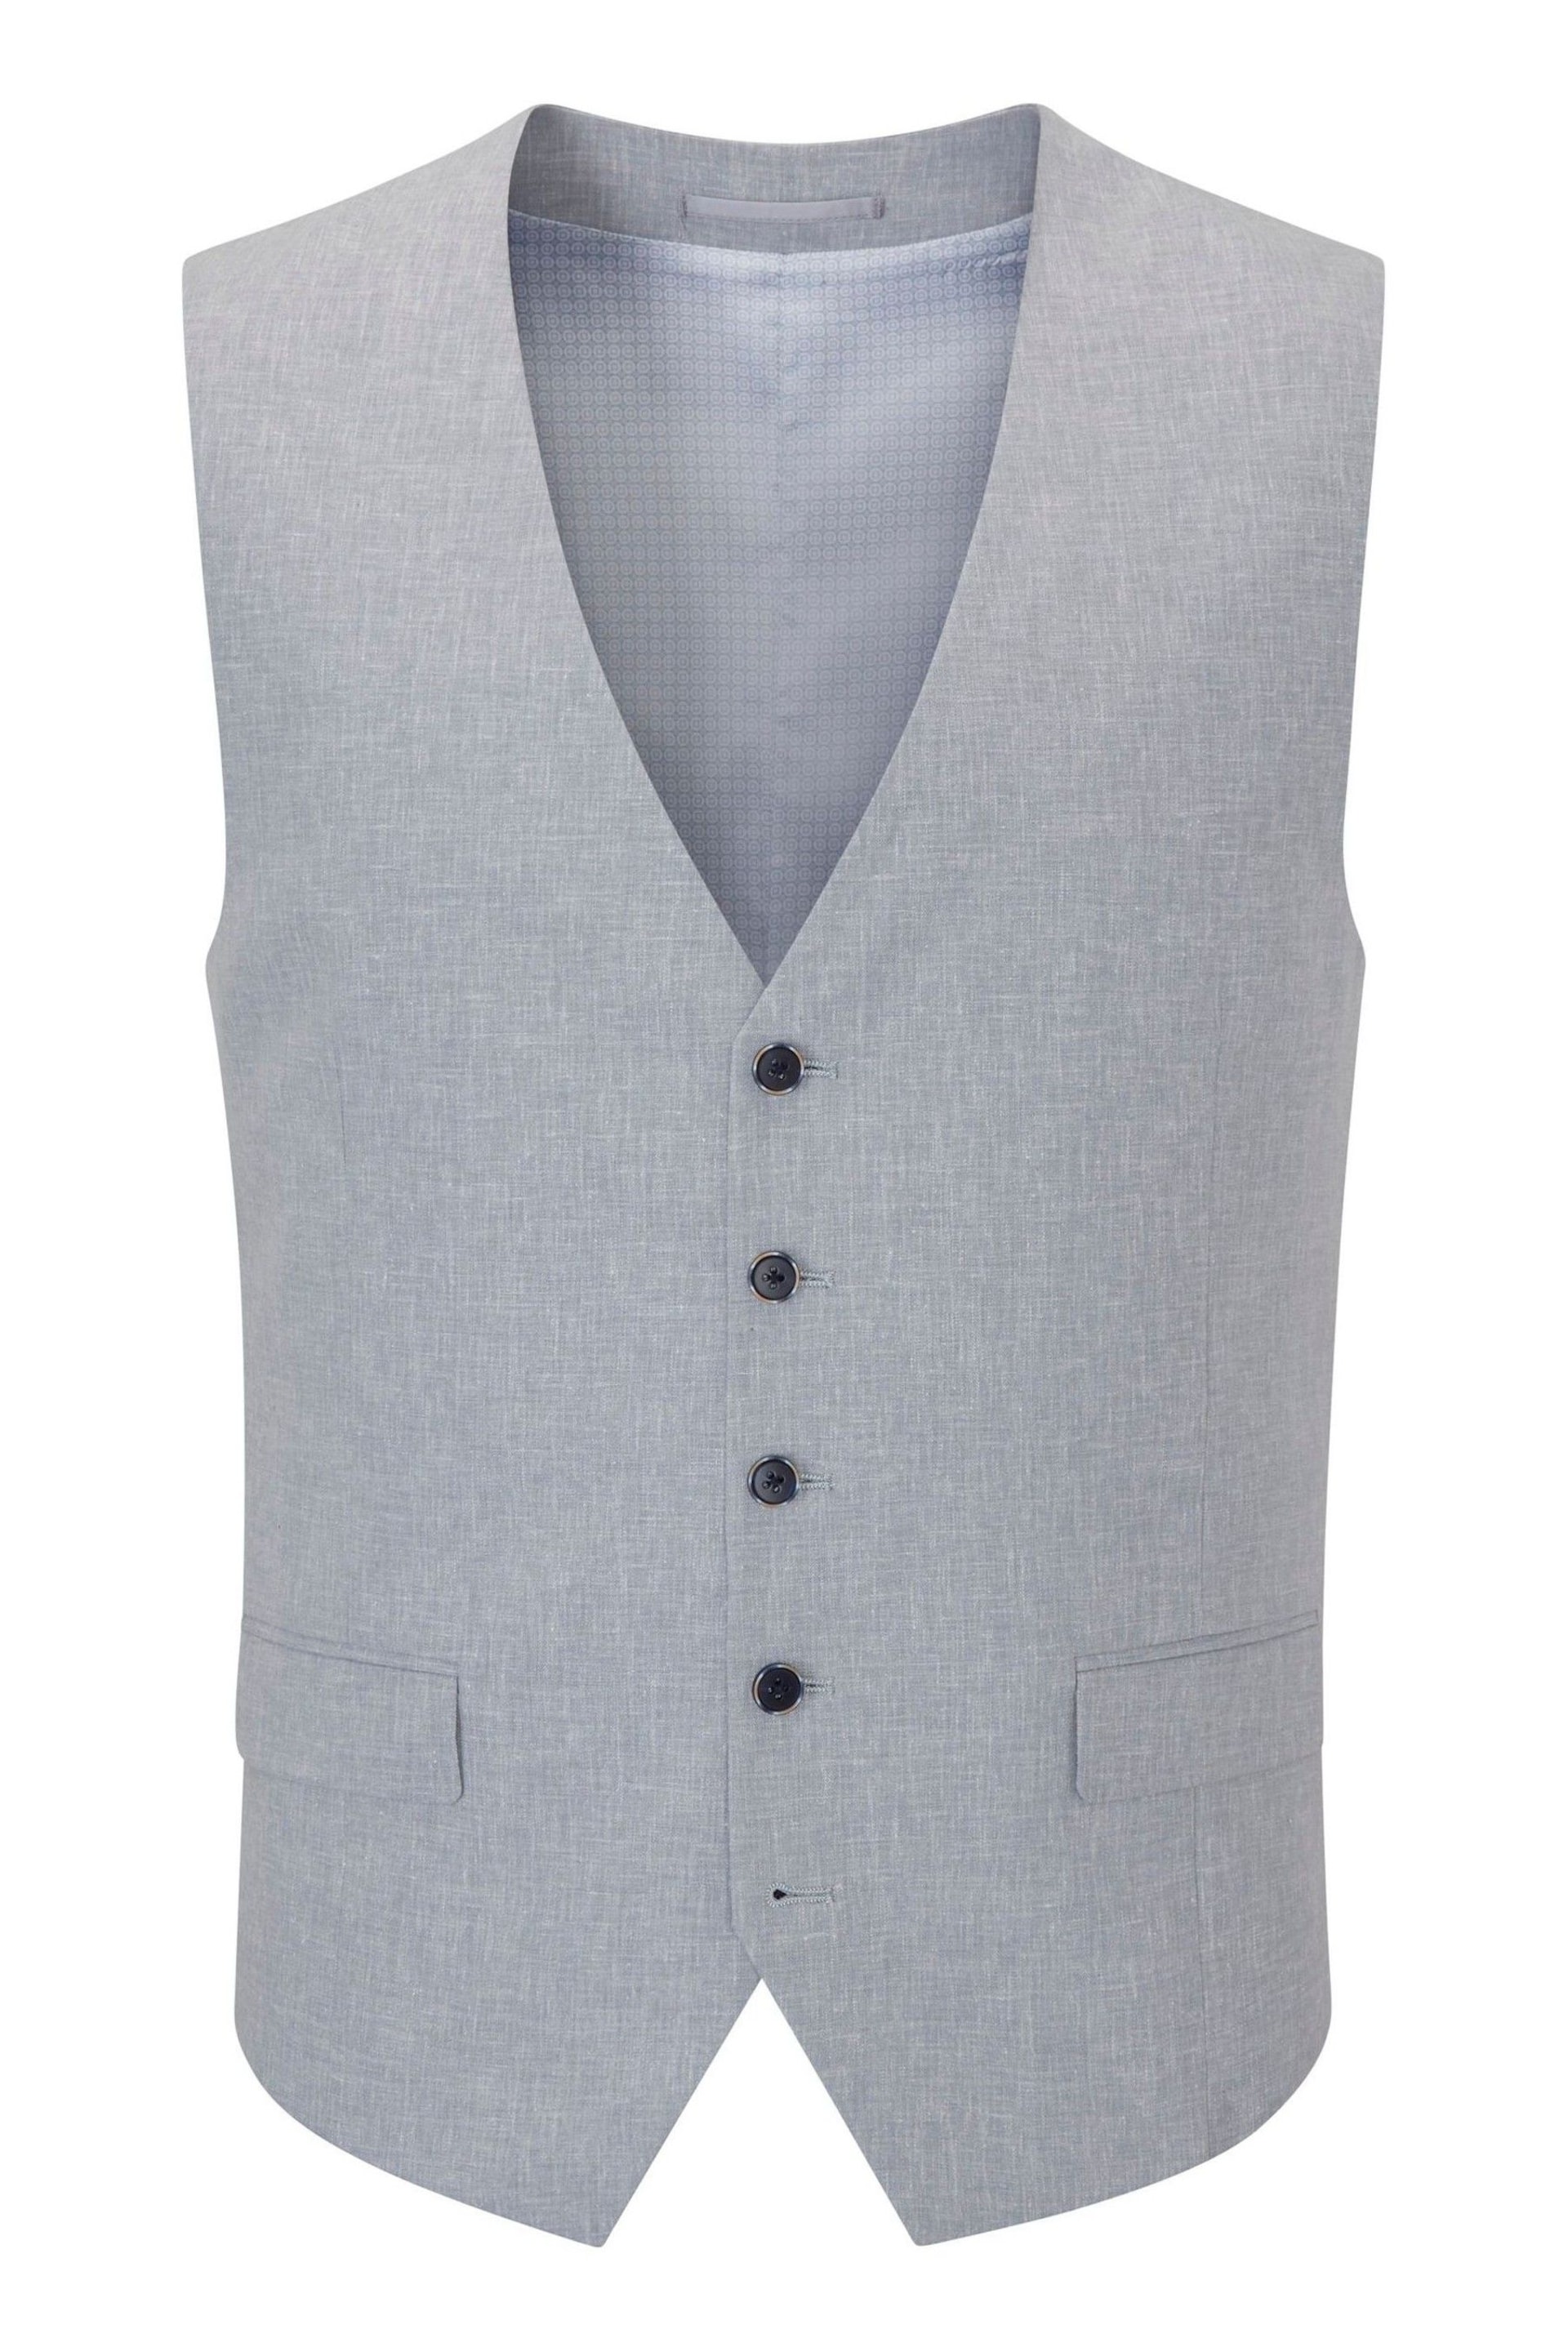 Skopes Silver Tuscany Linen Blend Suit: Waistcoat - Image 4 of 5